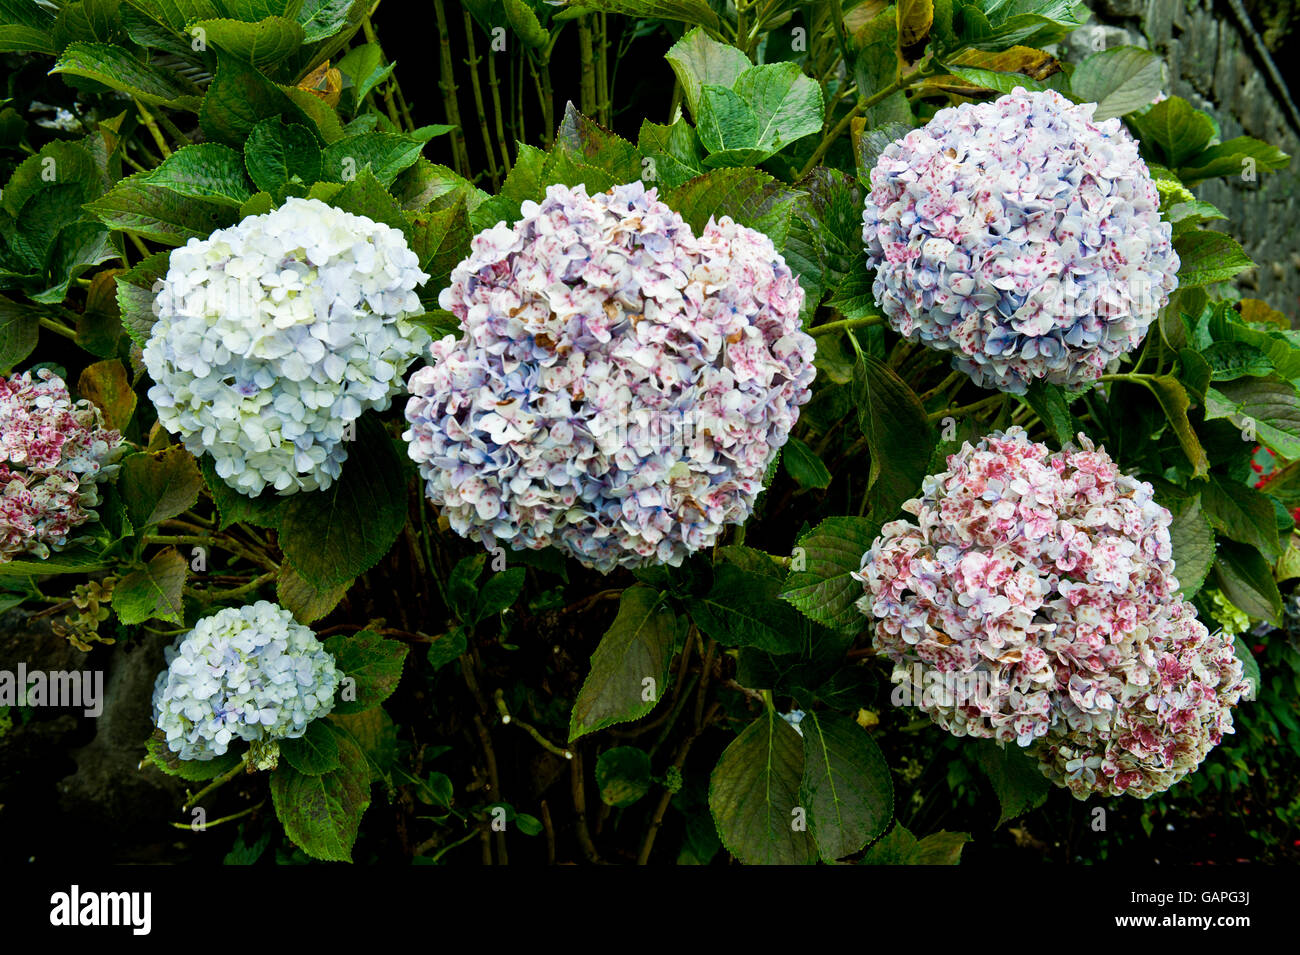 Stunning collection of outstanding fistful of Hortensia and Golden Rod flowers growing in multicolours in exquisite round symmetrical formation. Stock Photo